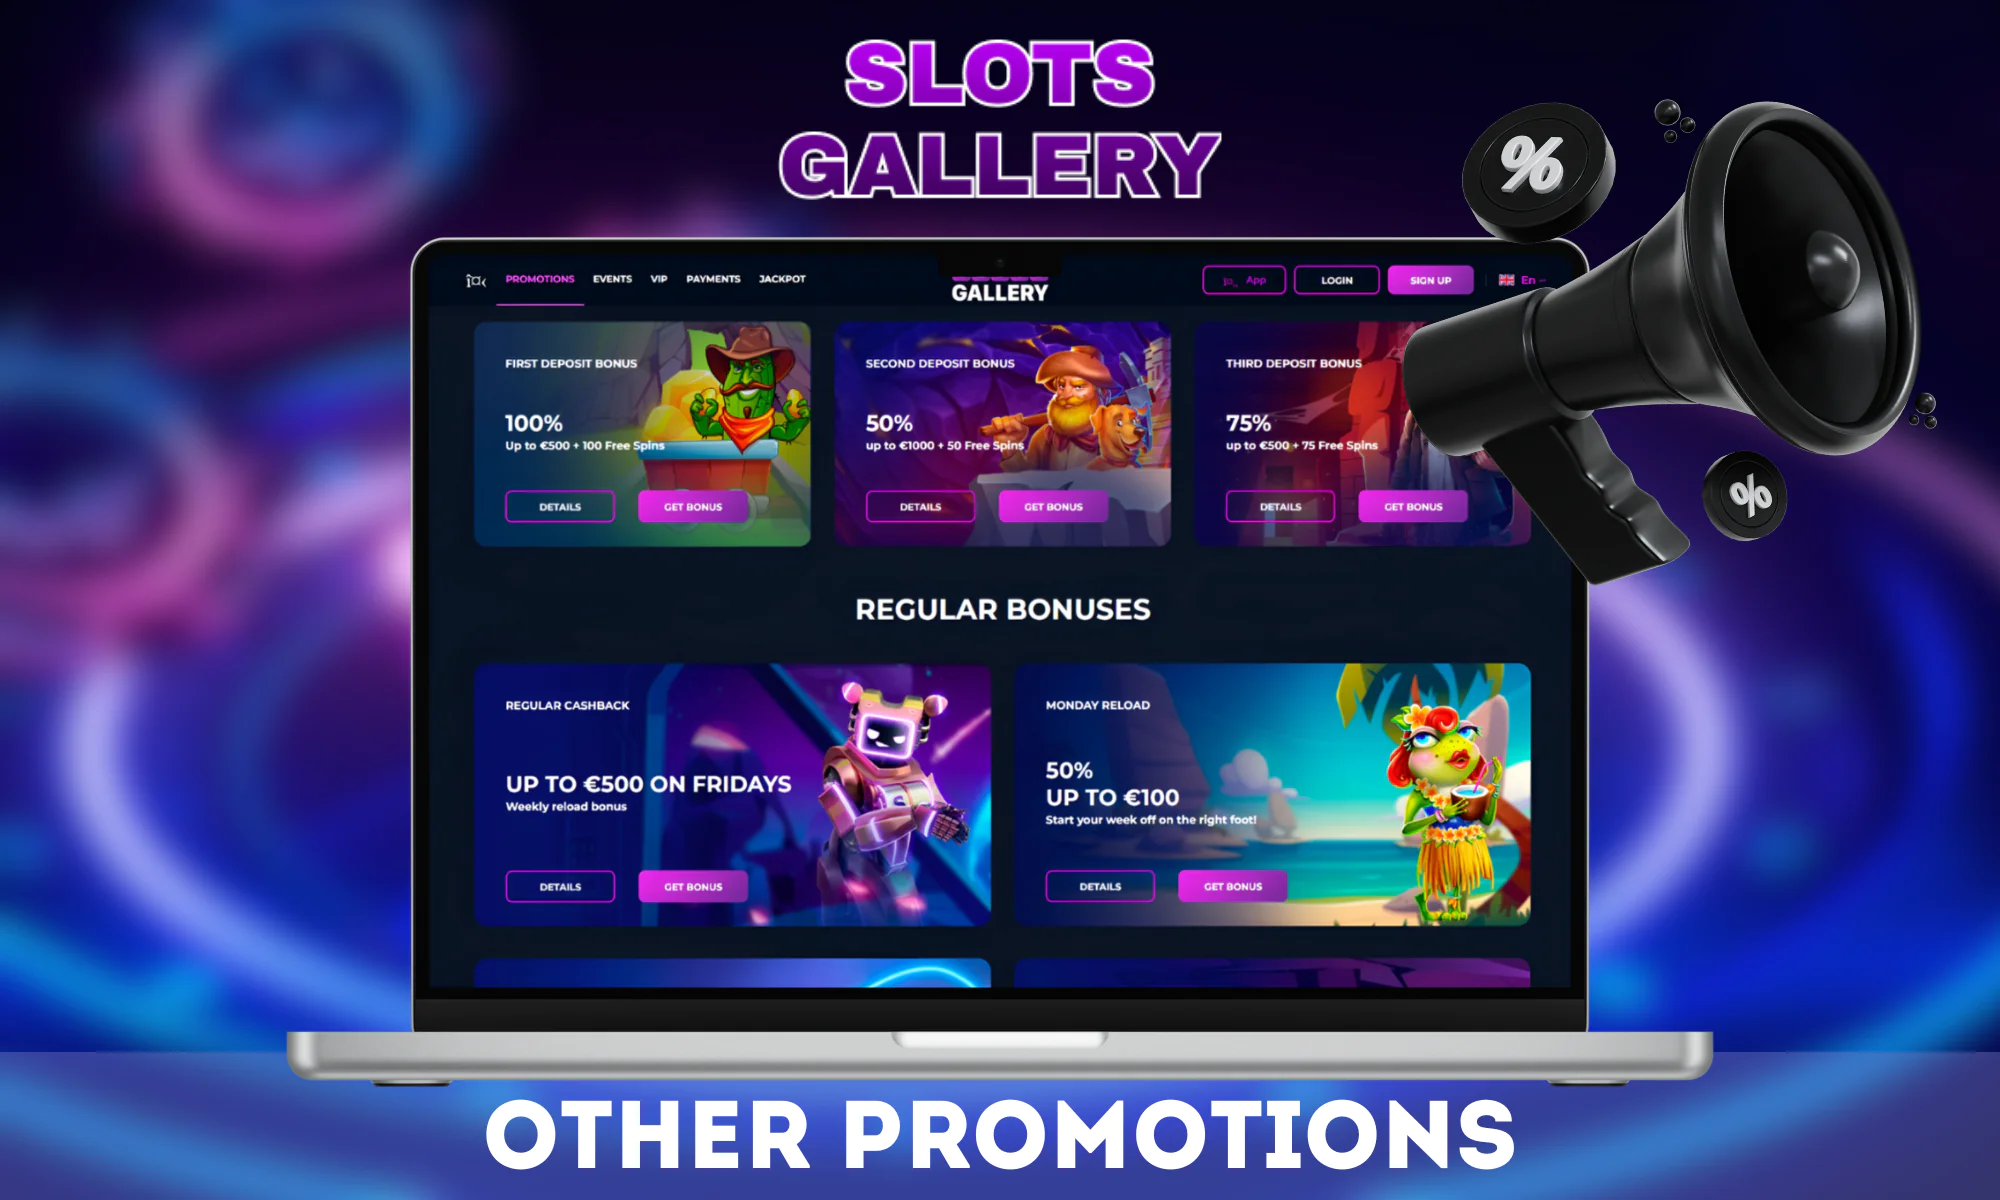 Slots gallery constantly has active promotions and bonus offers.